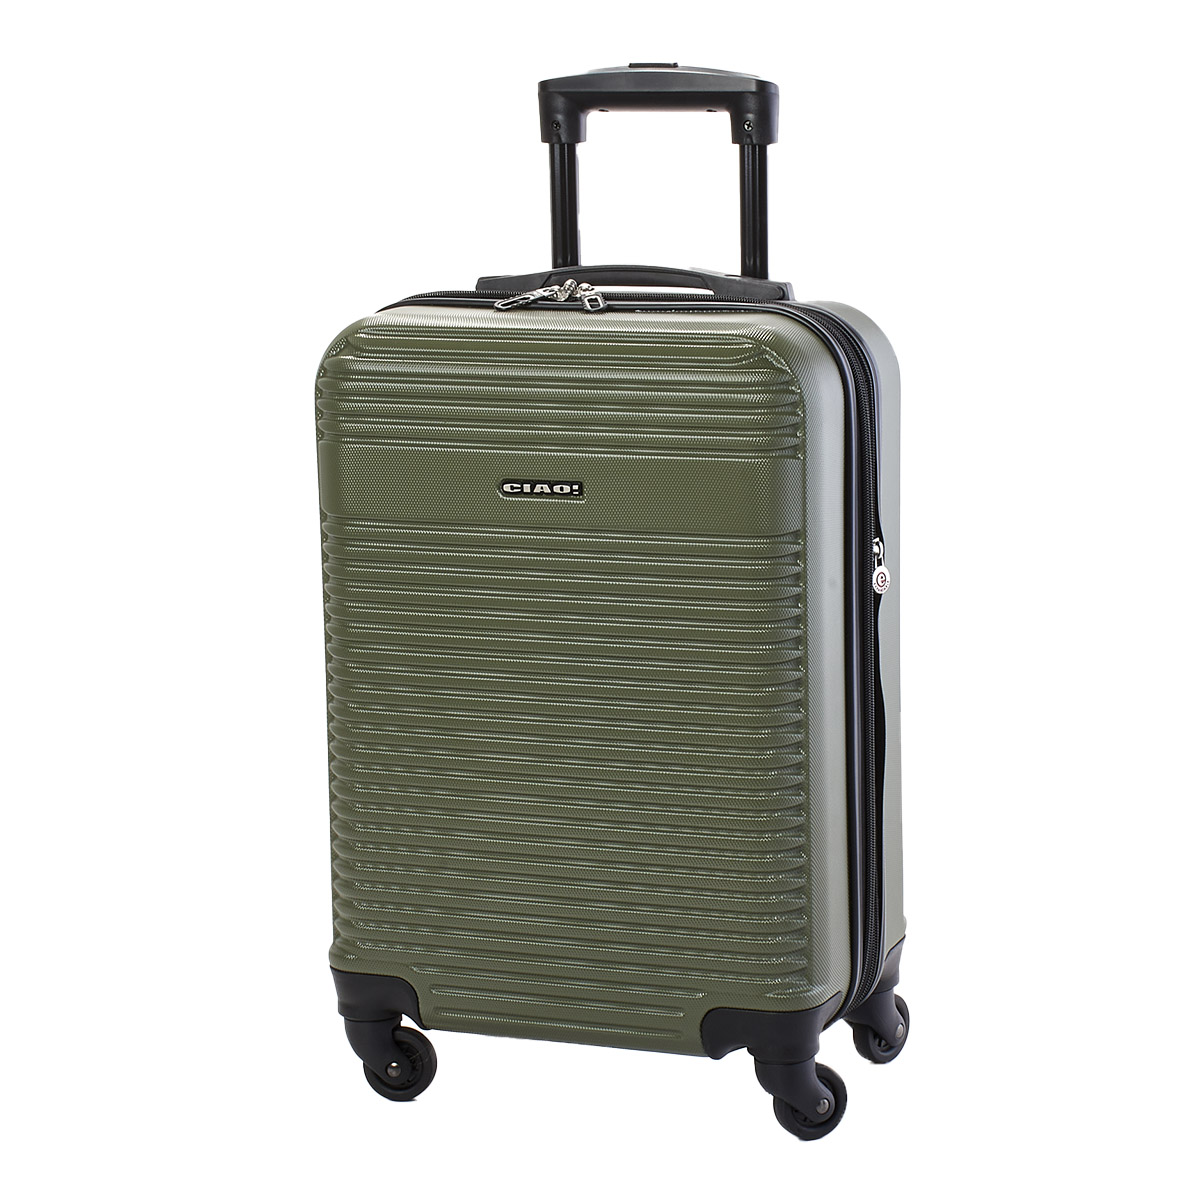 Ciao 20in. Hardside Carry-On Luggage - Olive